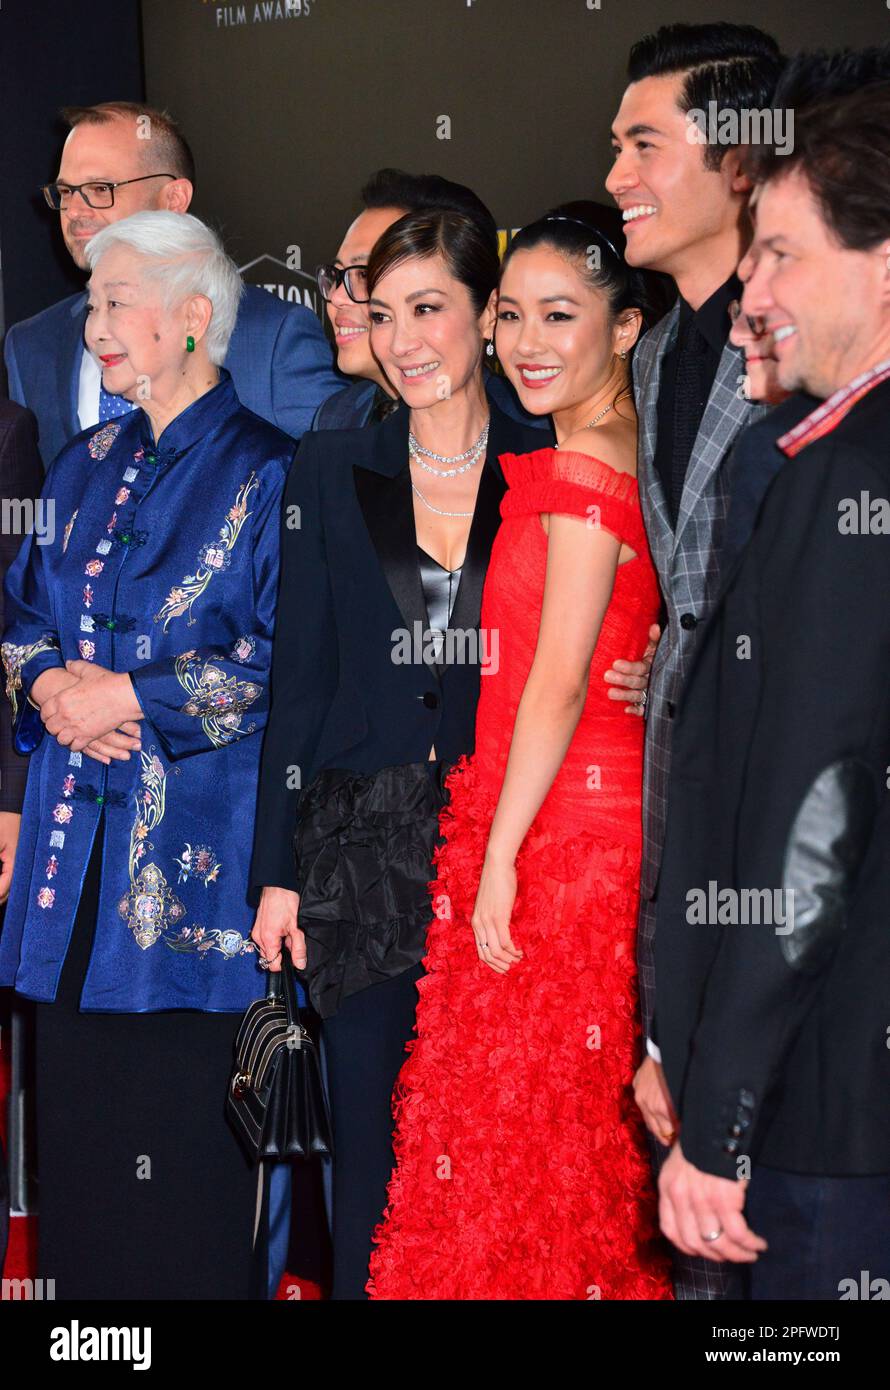 Lisa Lu, Michelle Yeoh, Constance Wu, Henry Golding 061 attends the 22nd Annual Hollywood Film Awards at The Beverly Hilton Hotel on November 4, 2018 in Beverly Hills, California.Richard Belzer, Comedian and Law & Order- SVU Mainstay, Dead at 78    © Tsuni / USA Lisa Lu, Michelle Yeoh, Constance Wu, Henry Golding 061 Stock Photo